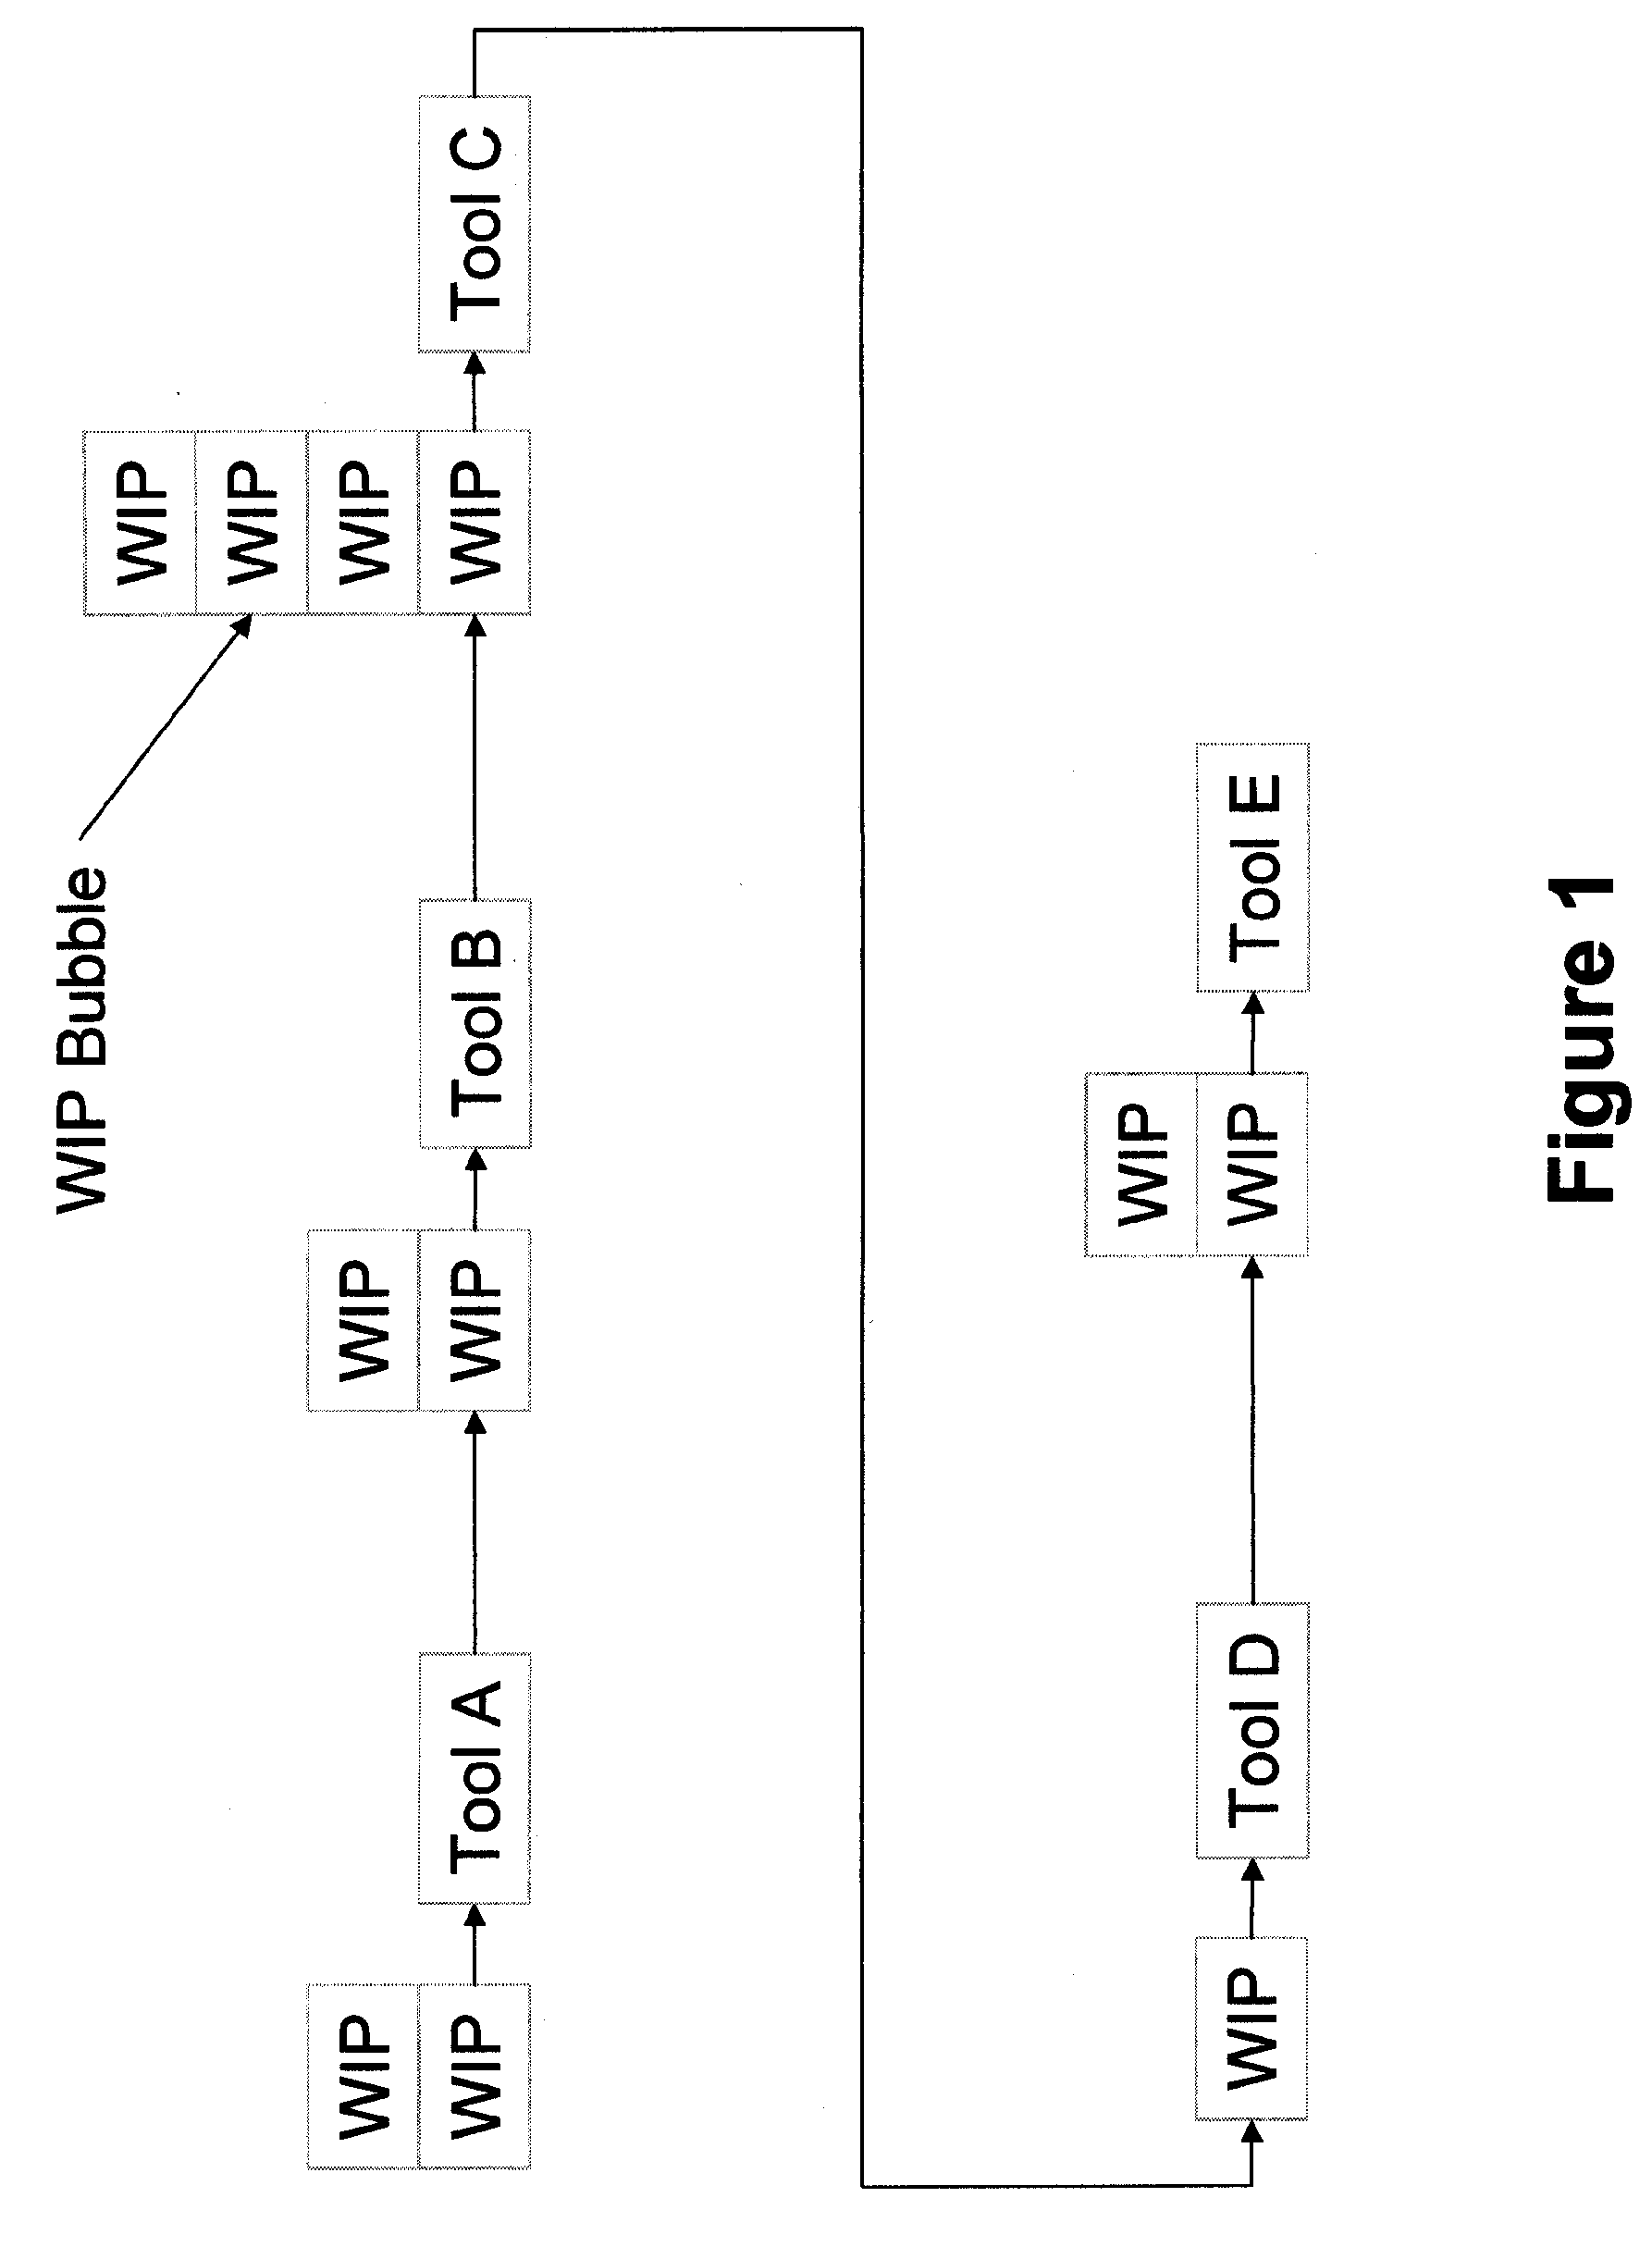 A method for autonomic control of a manufacturing system